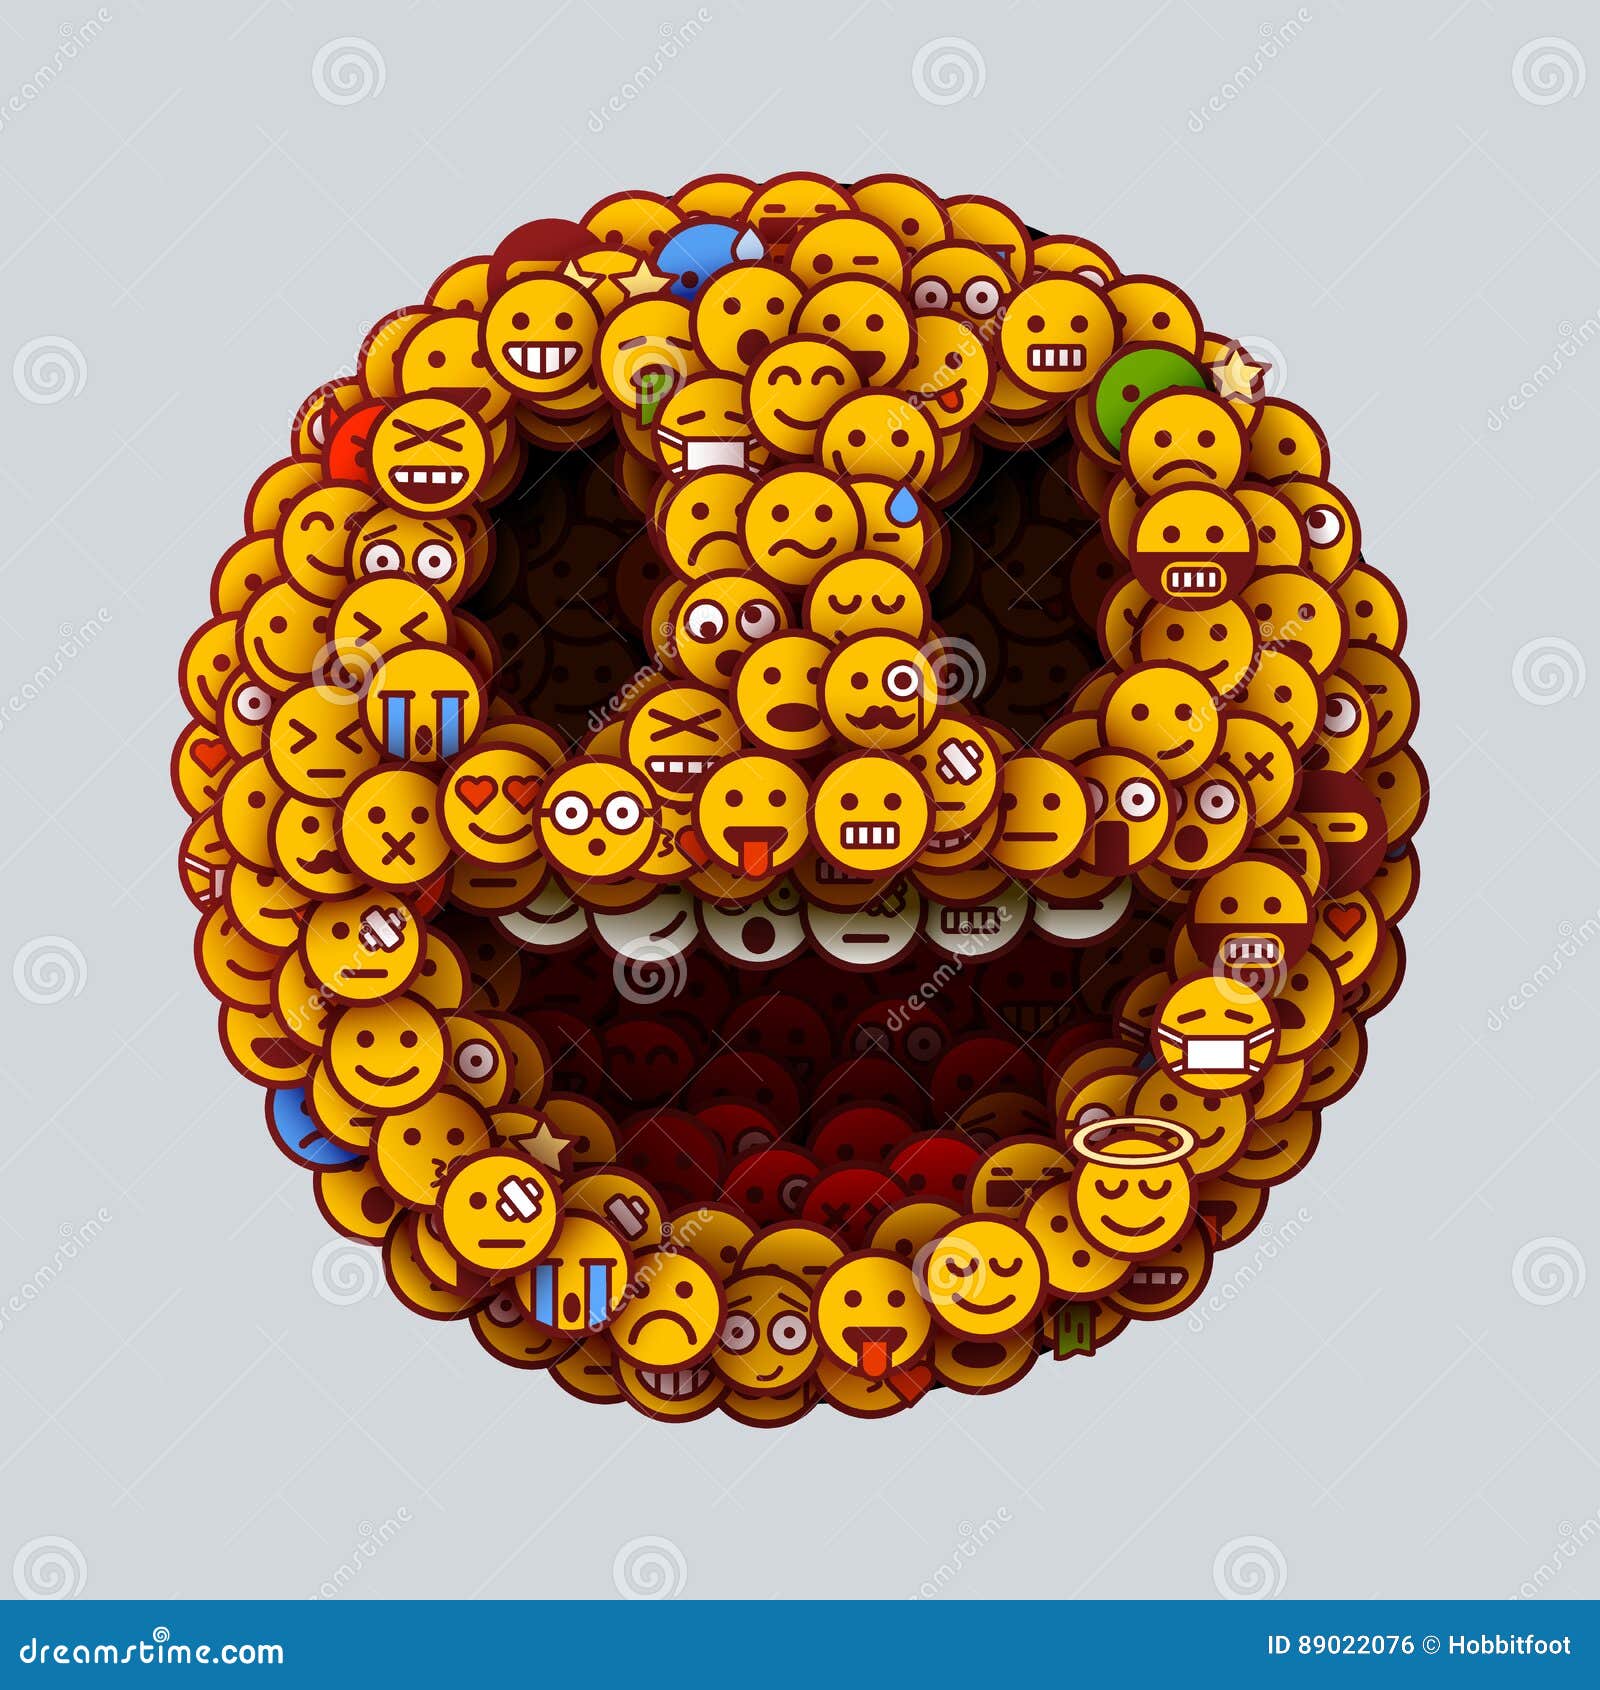 Smiley Face Made of Many Small Smiles. Unusual and Creative Smile ...